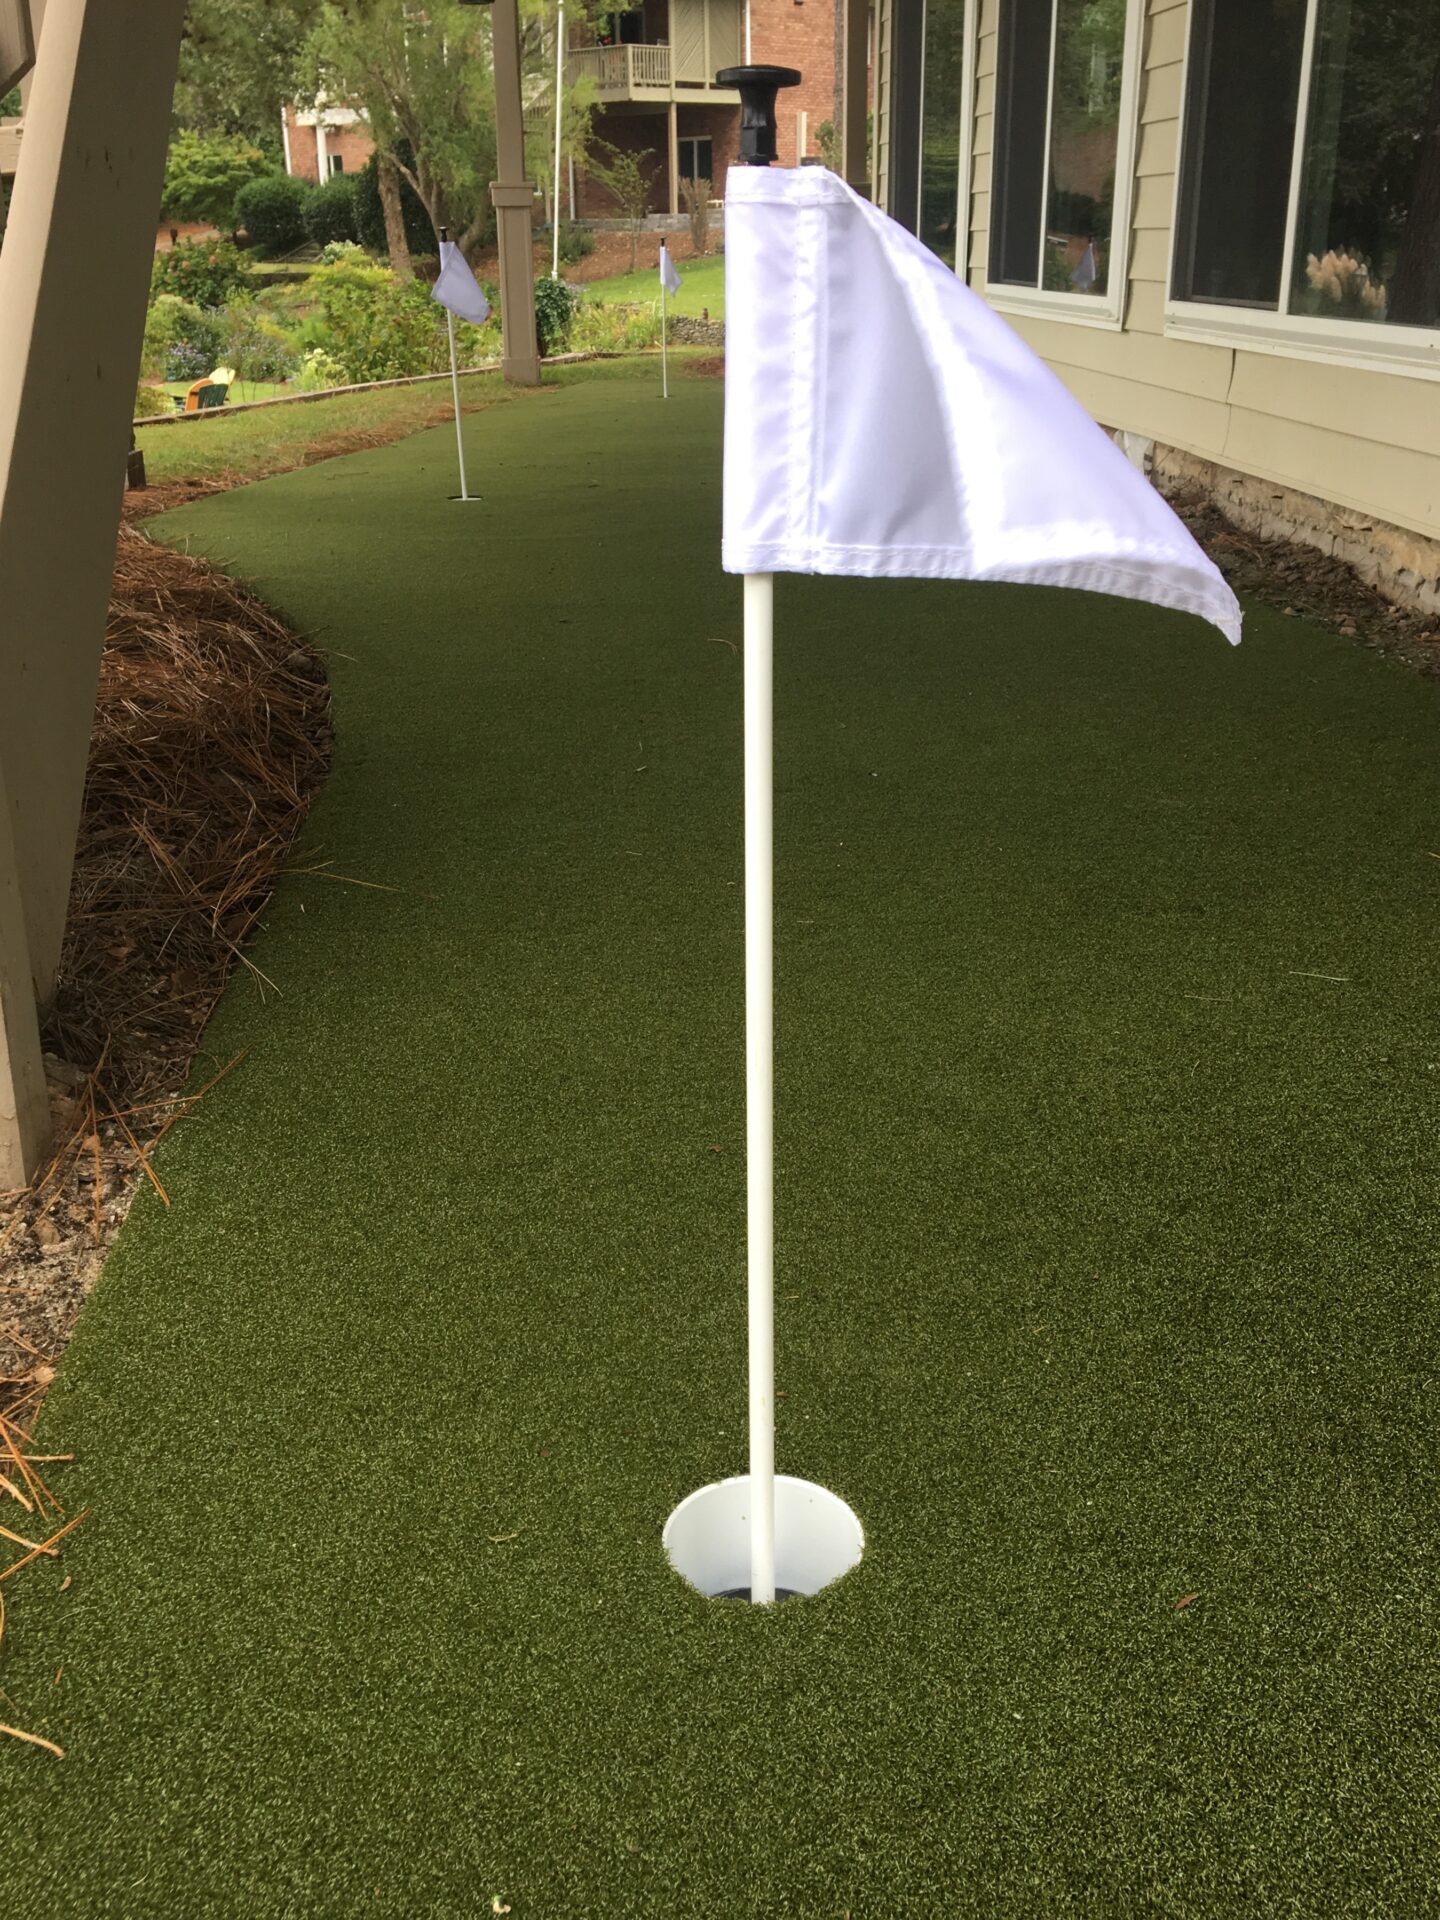 This image shows a part of a putting green with a white golf flag and hole. Artificial turf covers the ground, and there's landscaping in the background.